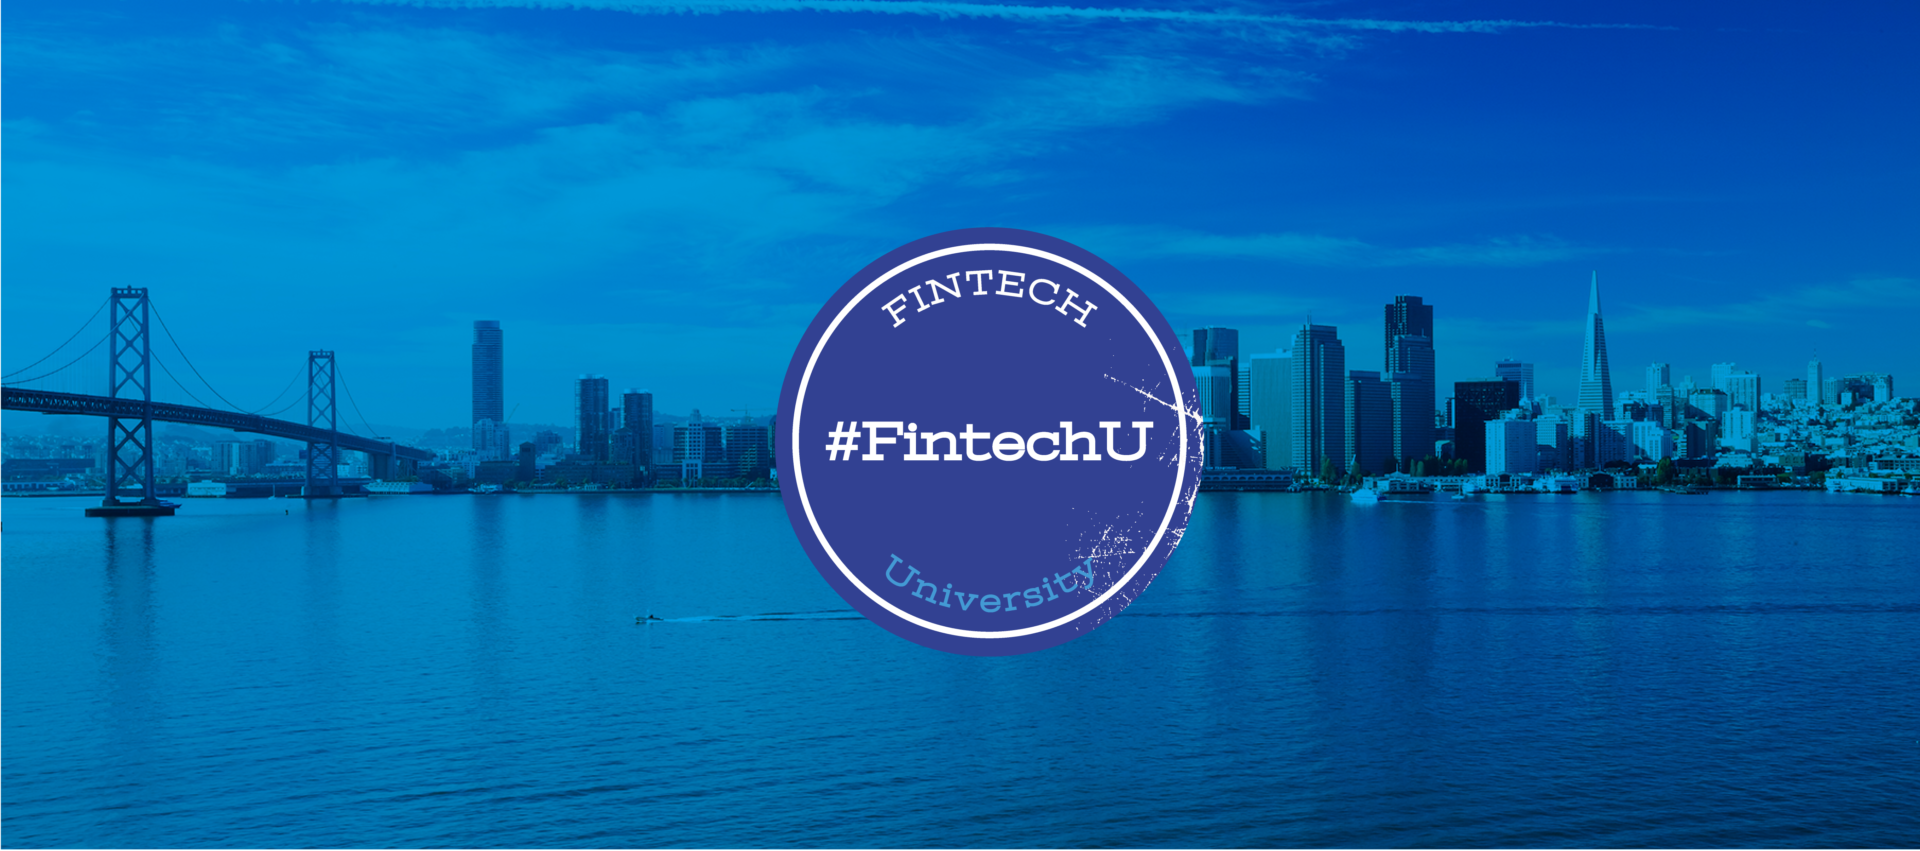 An image for Fintech University in San Francisco